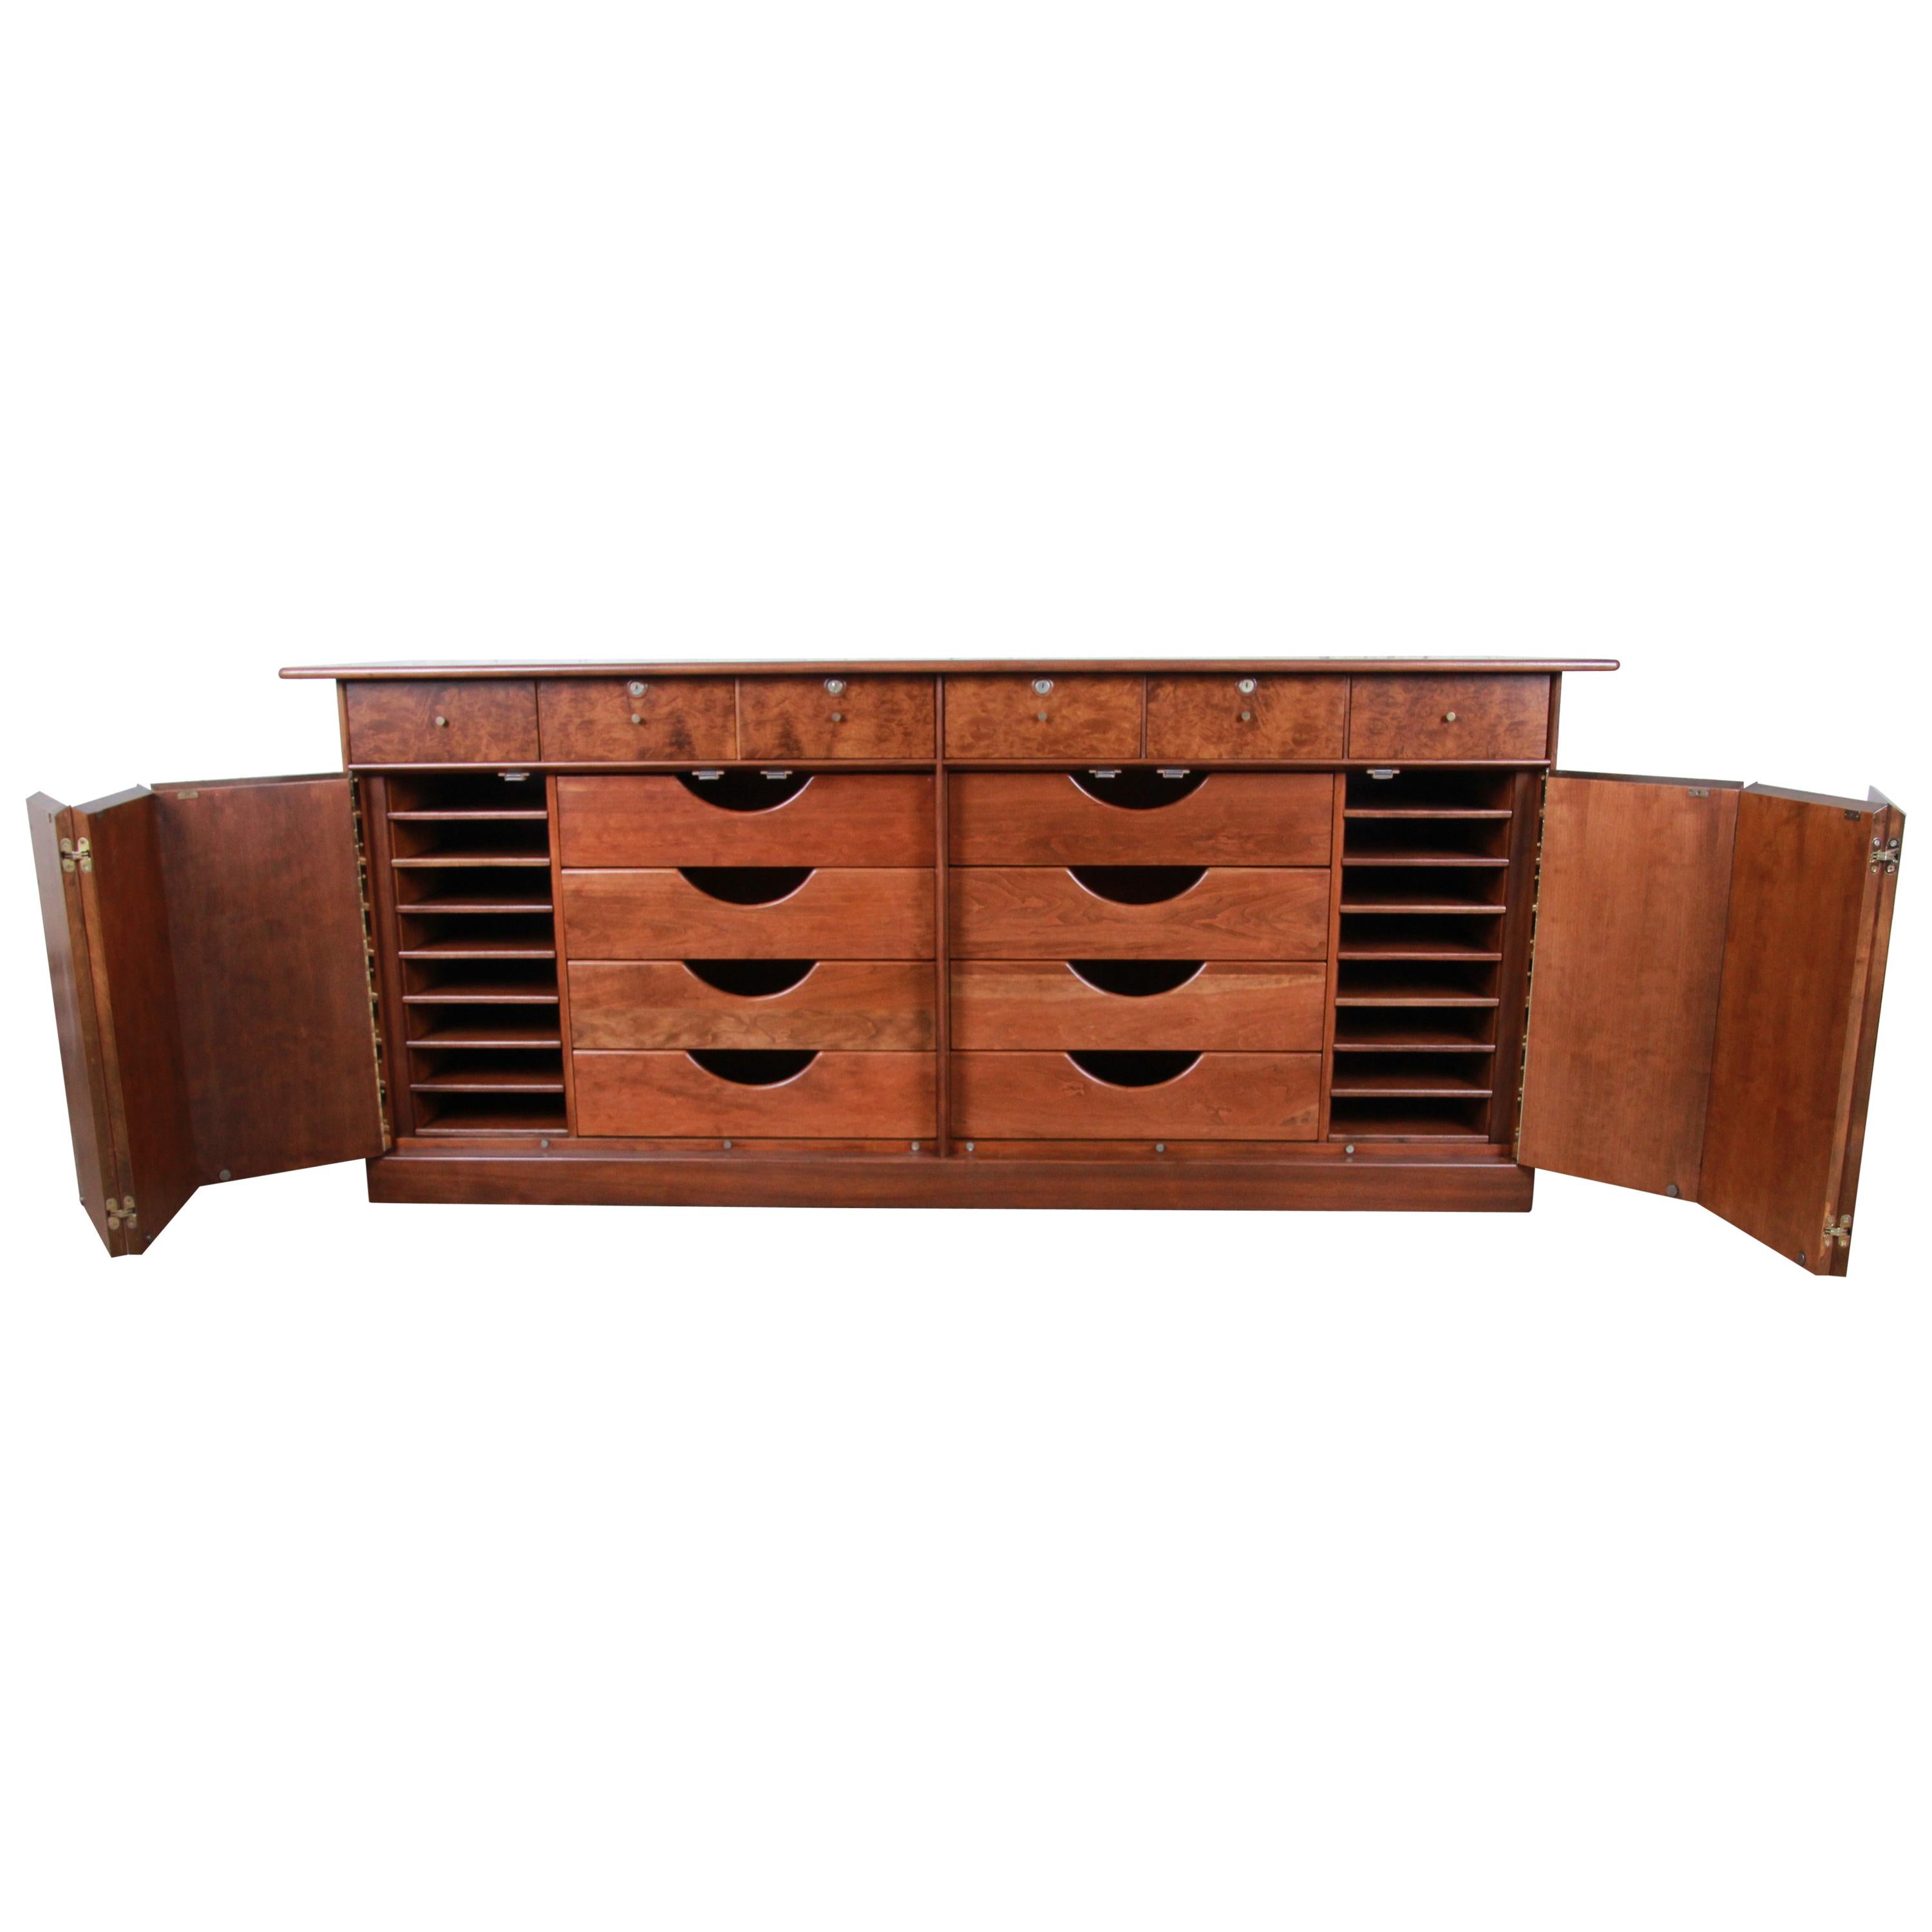 Milo Baughman for Directional Cherry and Burl Dresser or Credenza, Restored